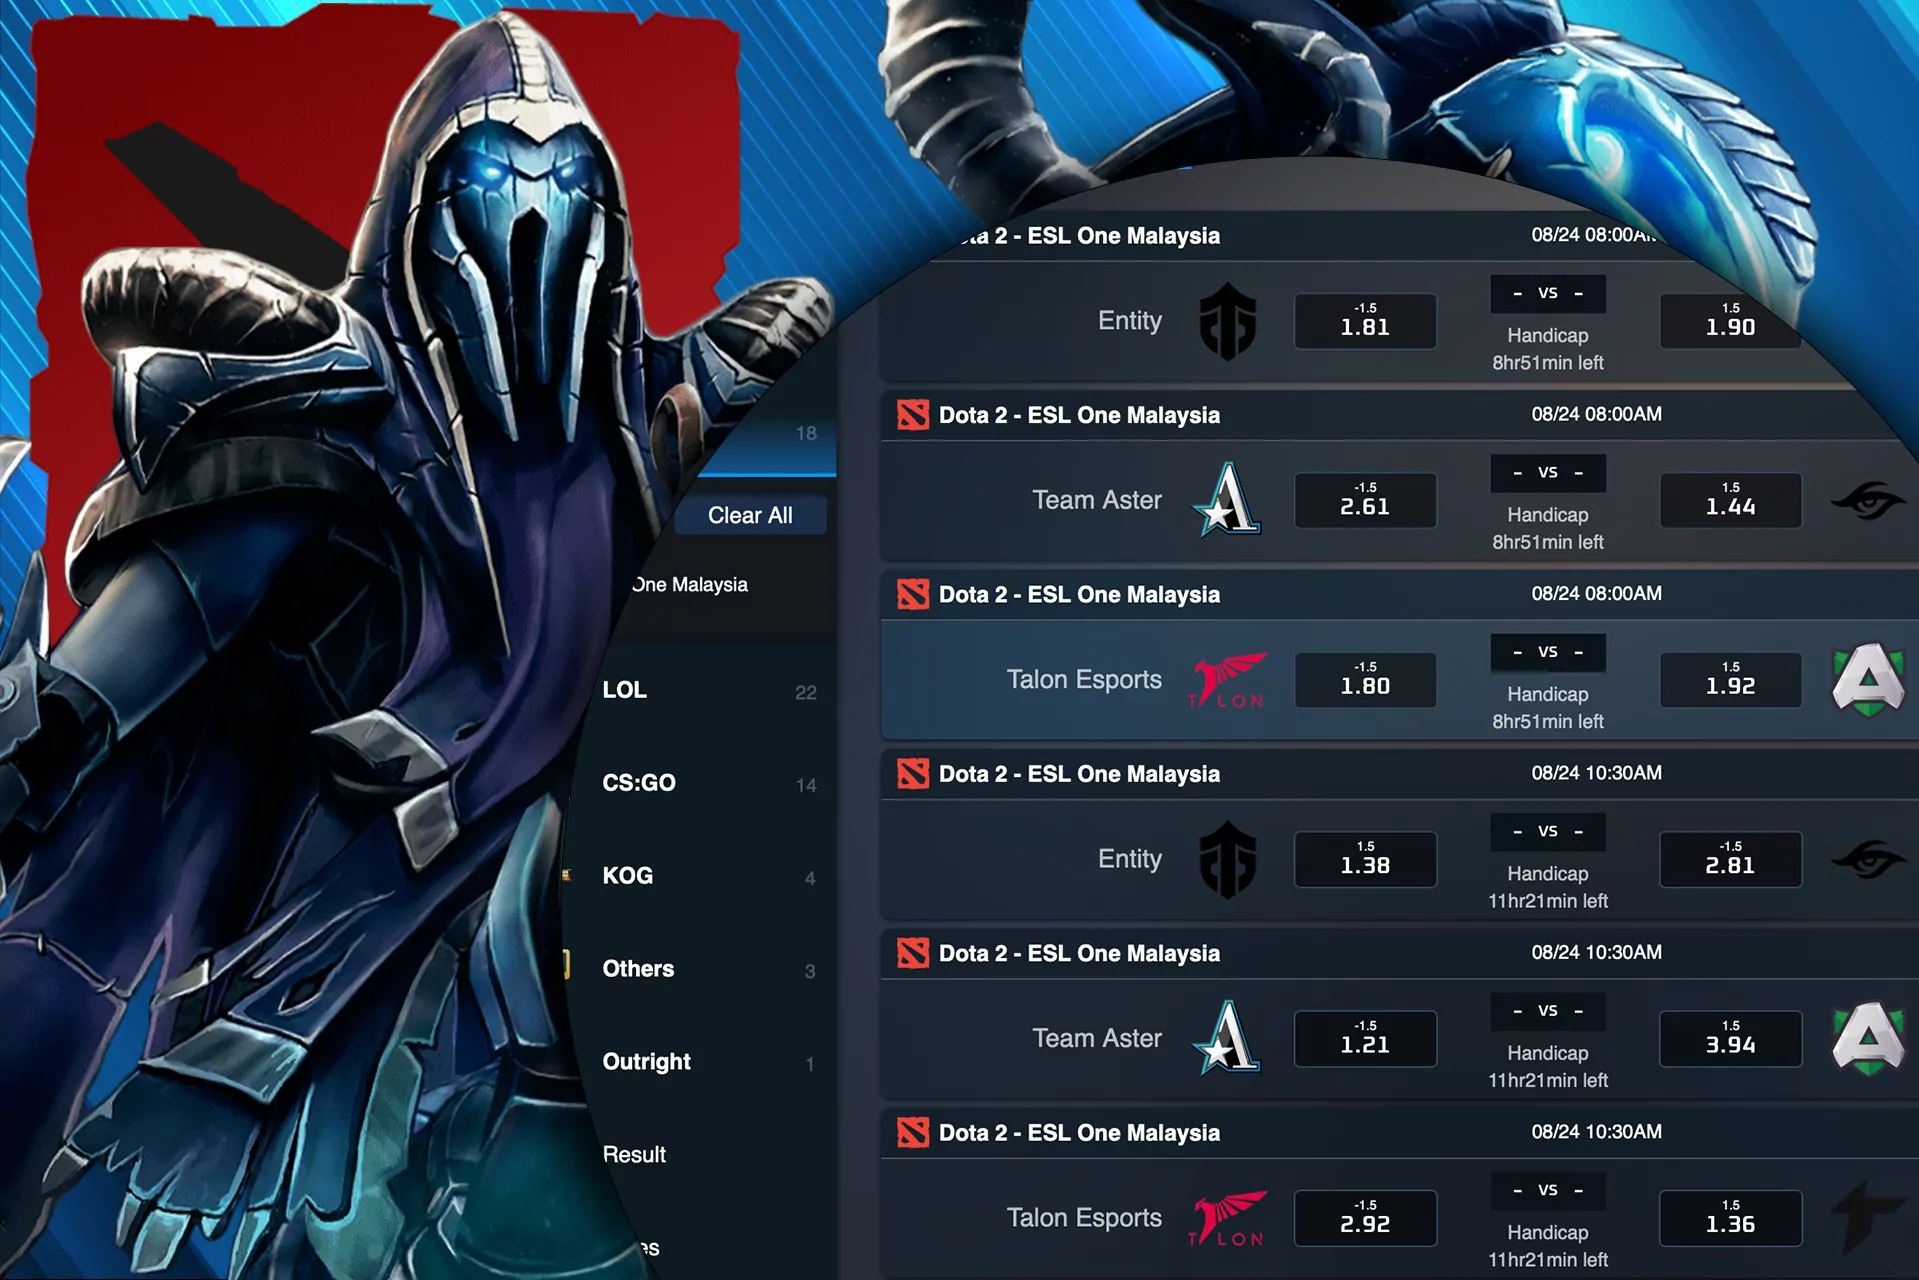 Dota 2 is the most popular cybersport to bet on at Crickex.